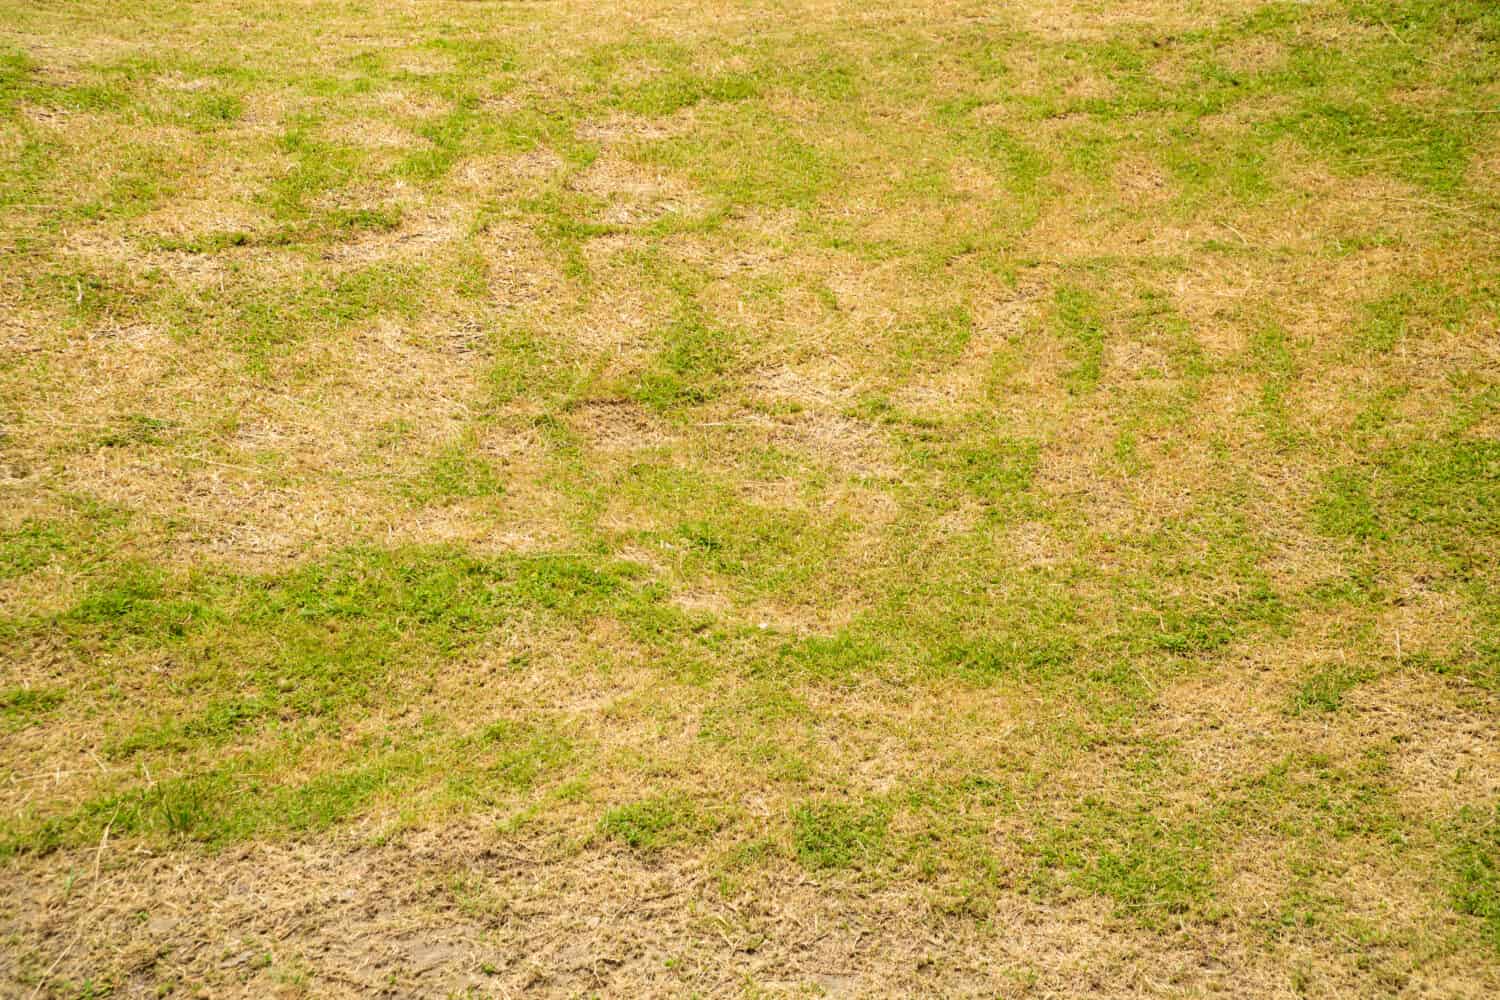 Yellowing grass may be a sign that your soil is too acidic. Applying lime in the best way improves your lawn.